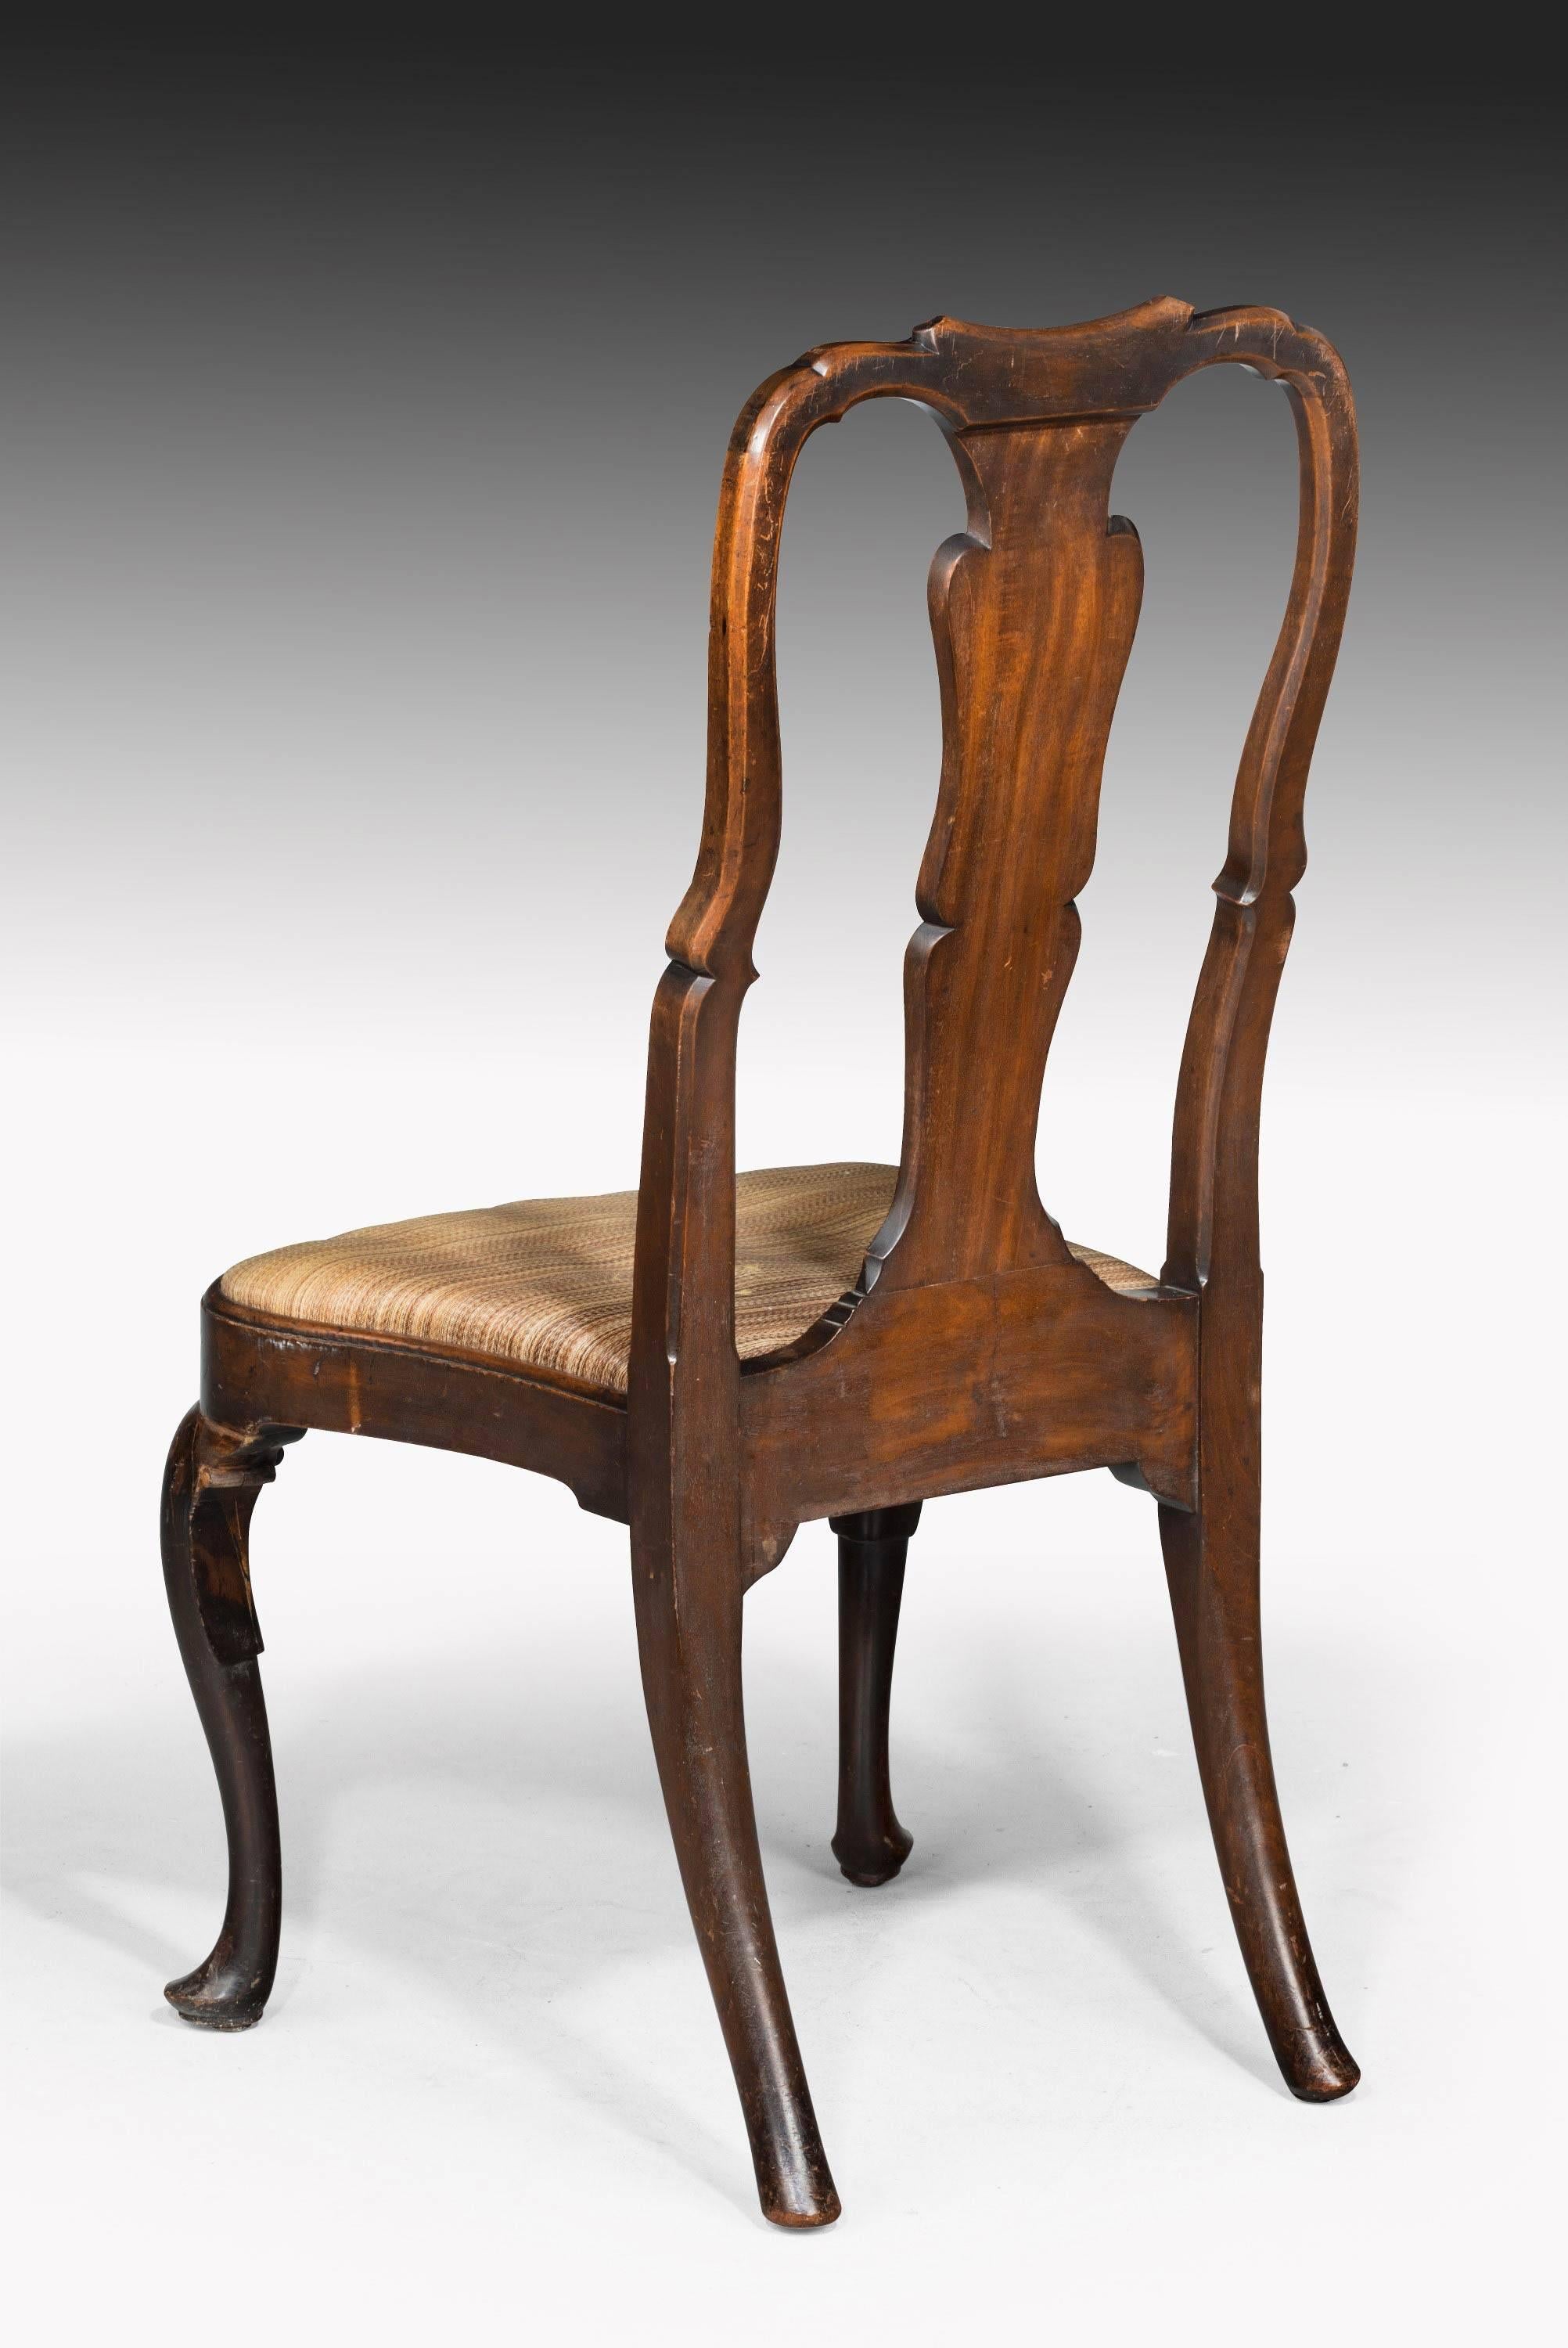 A very unusual George II period mahogany single chair of Queen Anne design. Shaped vase splat and shaped side rails. Excellent overall condition. 

Seat height 18 inches.